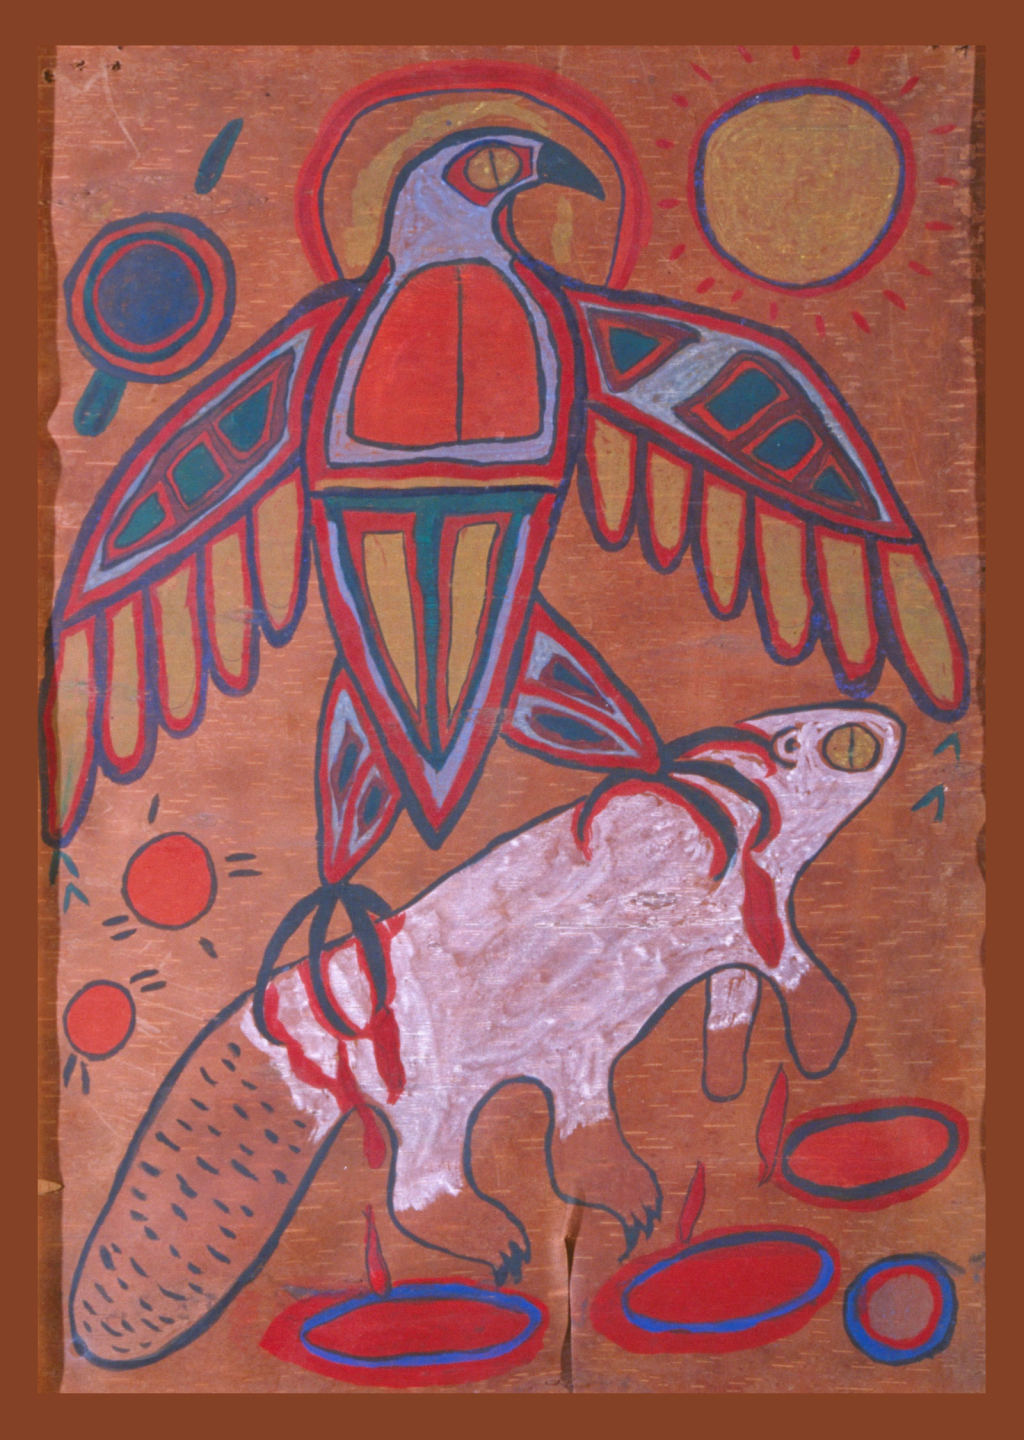 Painting of an eagle catching a beaver in its claws